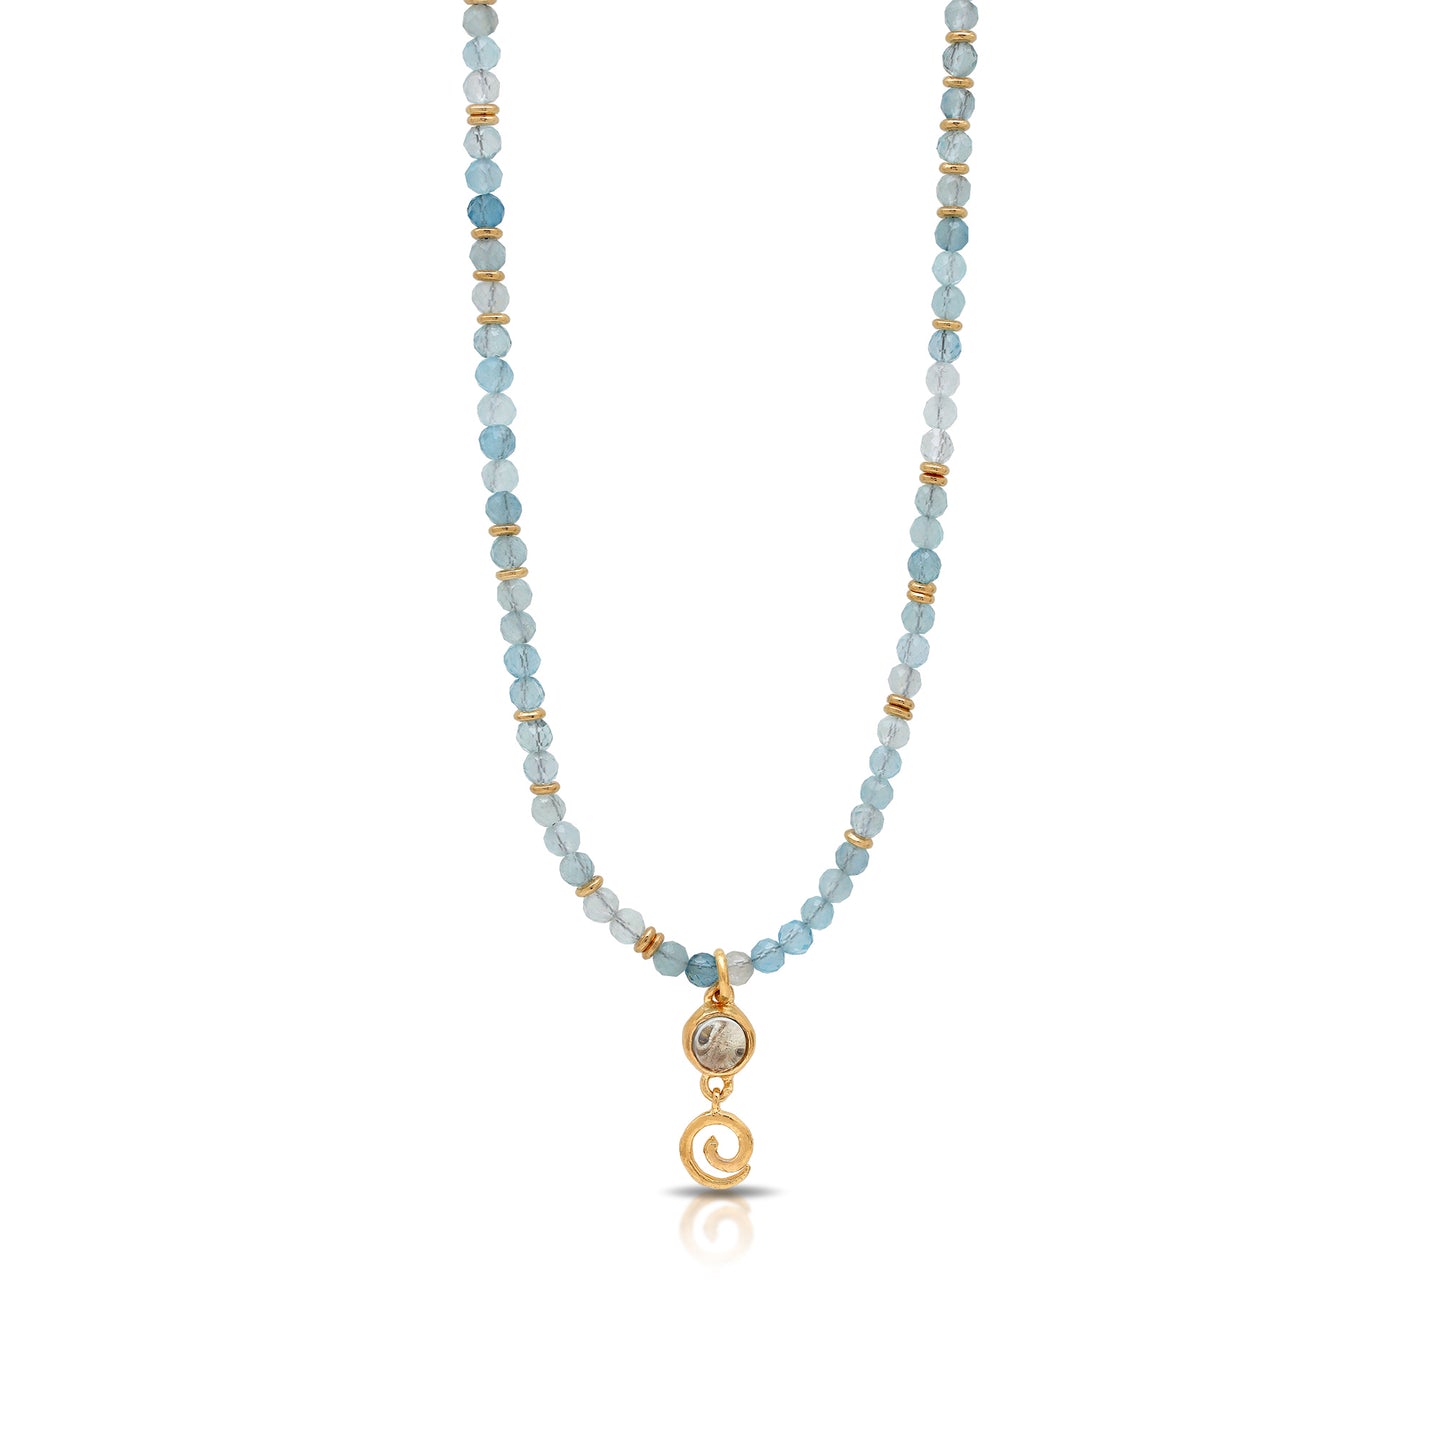 Blue Topaz and Aqua Marine Air Element Beaded Necklace and Pendant